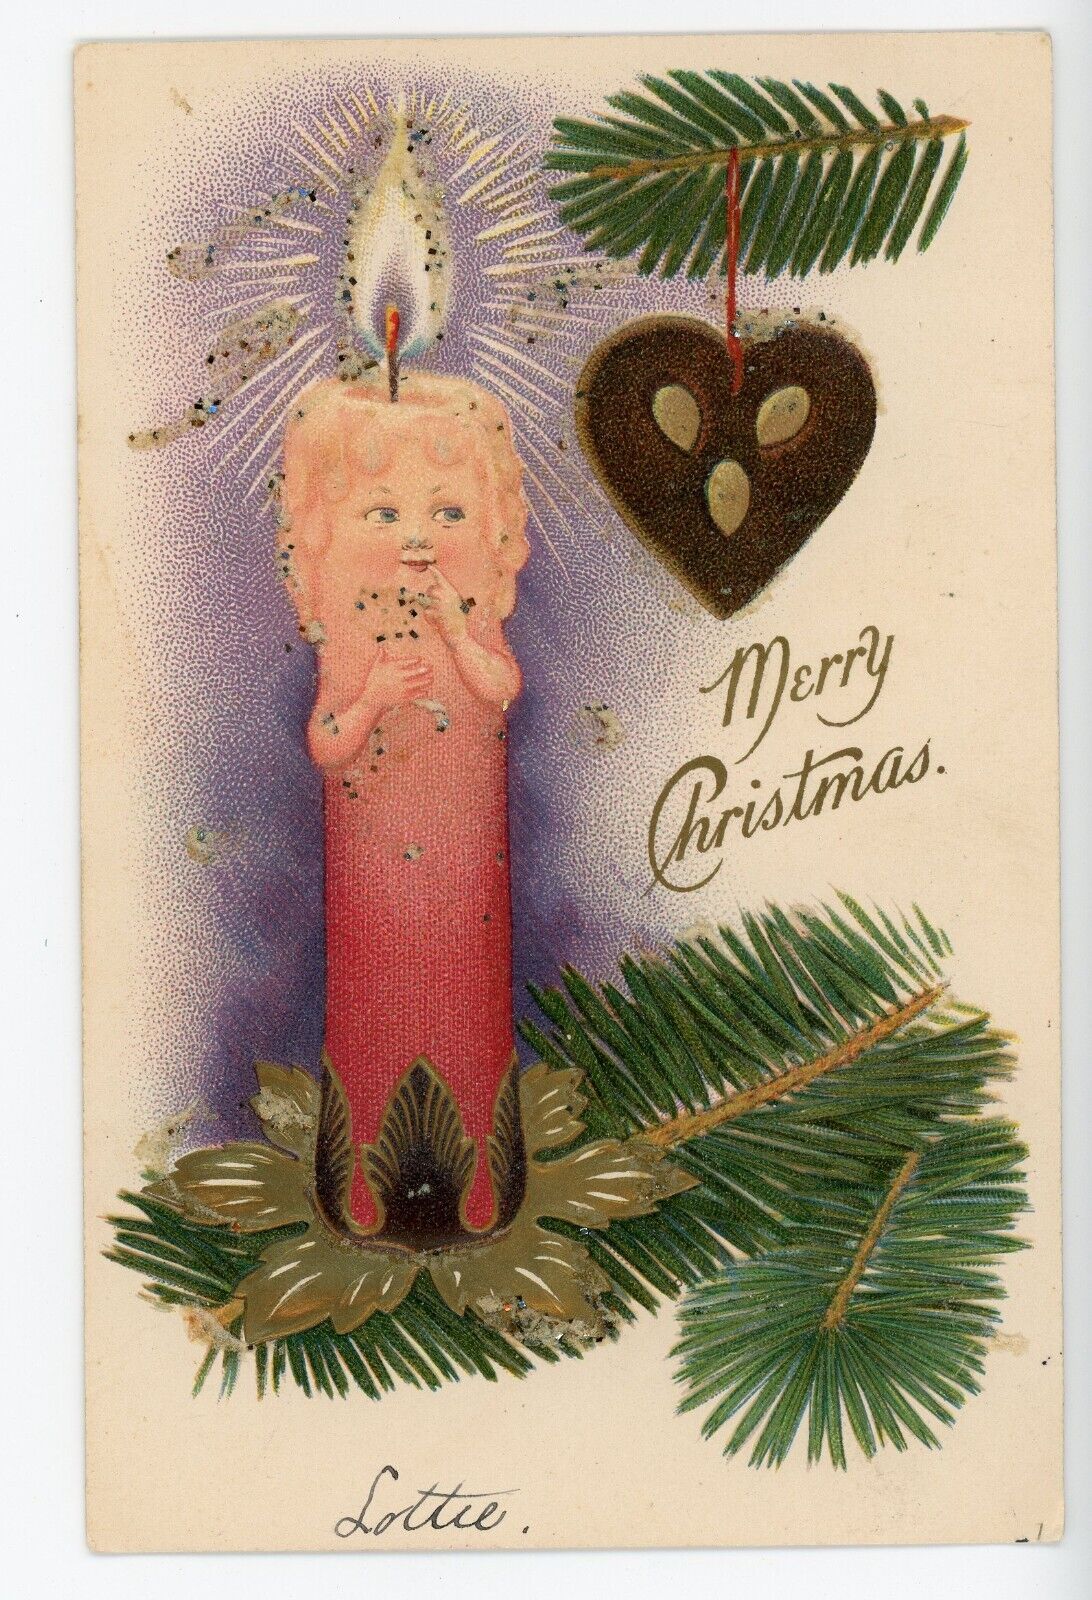 Fantasy Postcard Merry Christmas Anthropomorphic Candle Heart Ornament